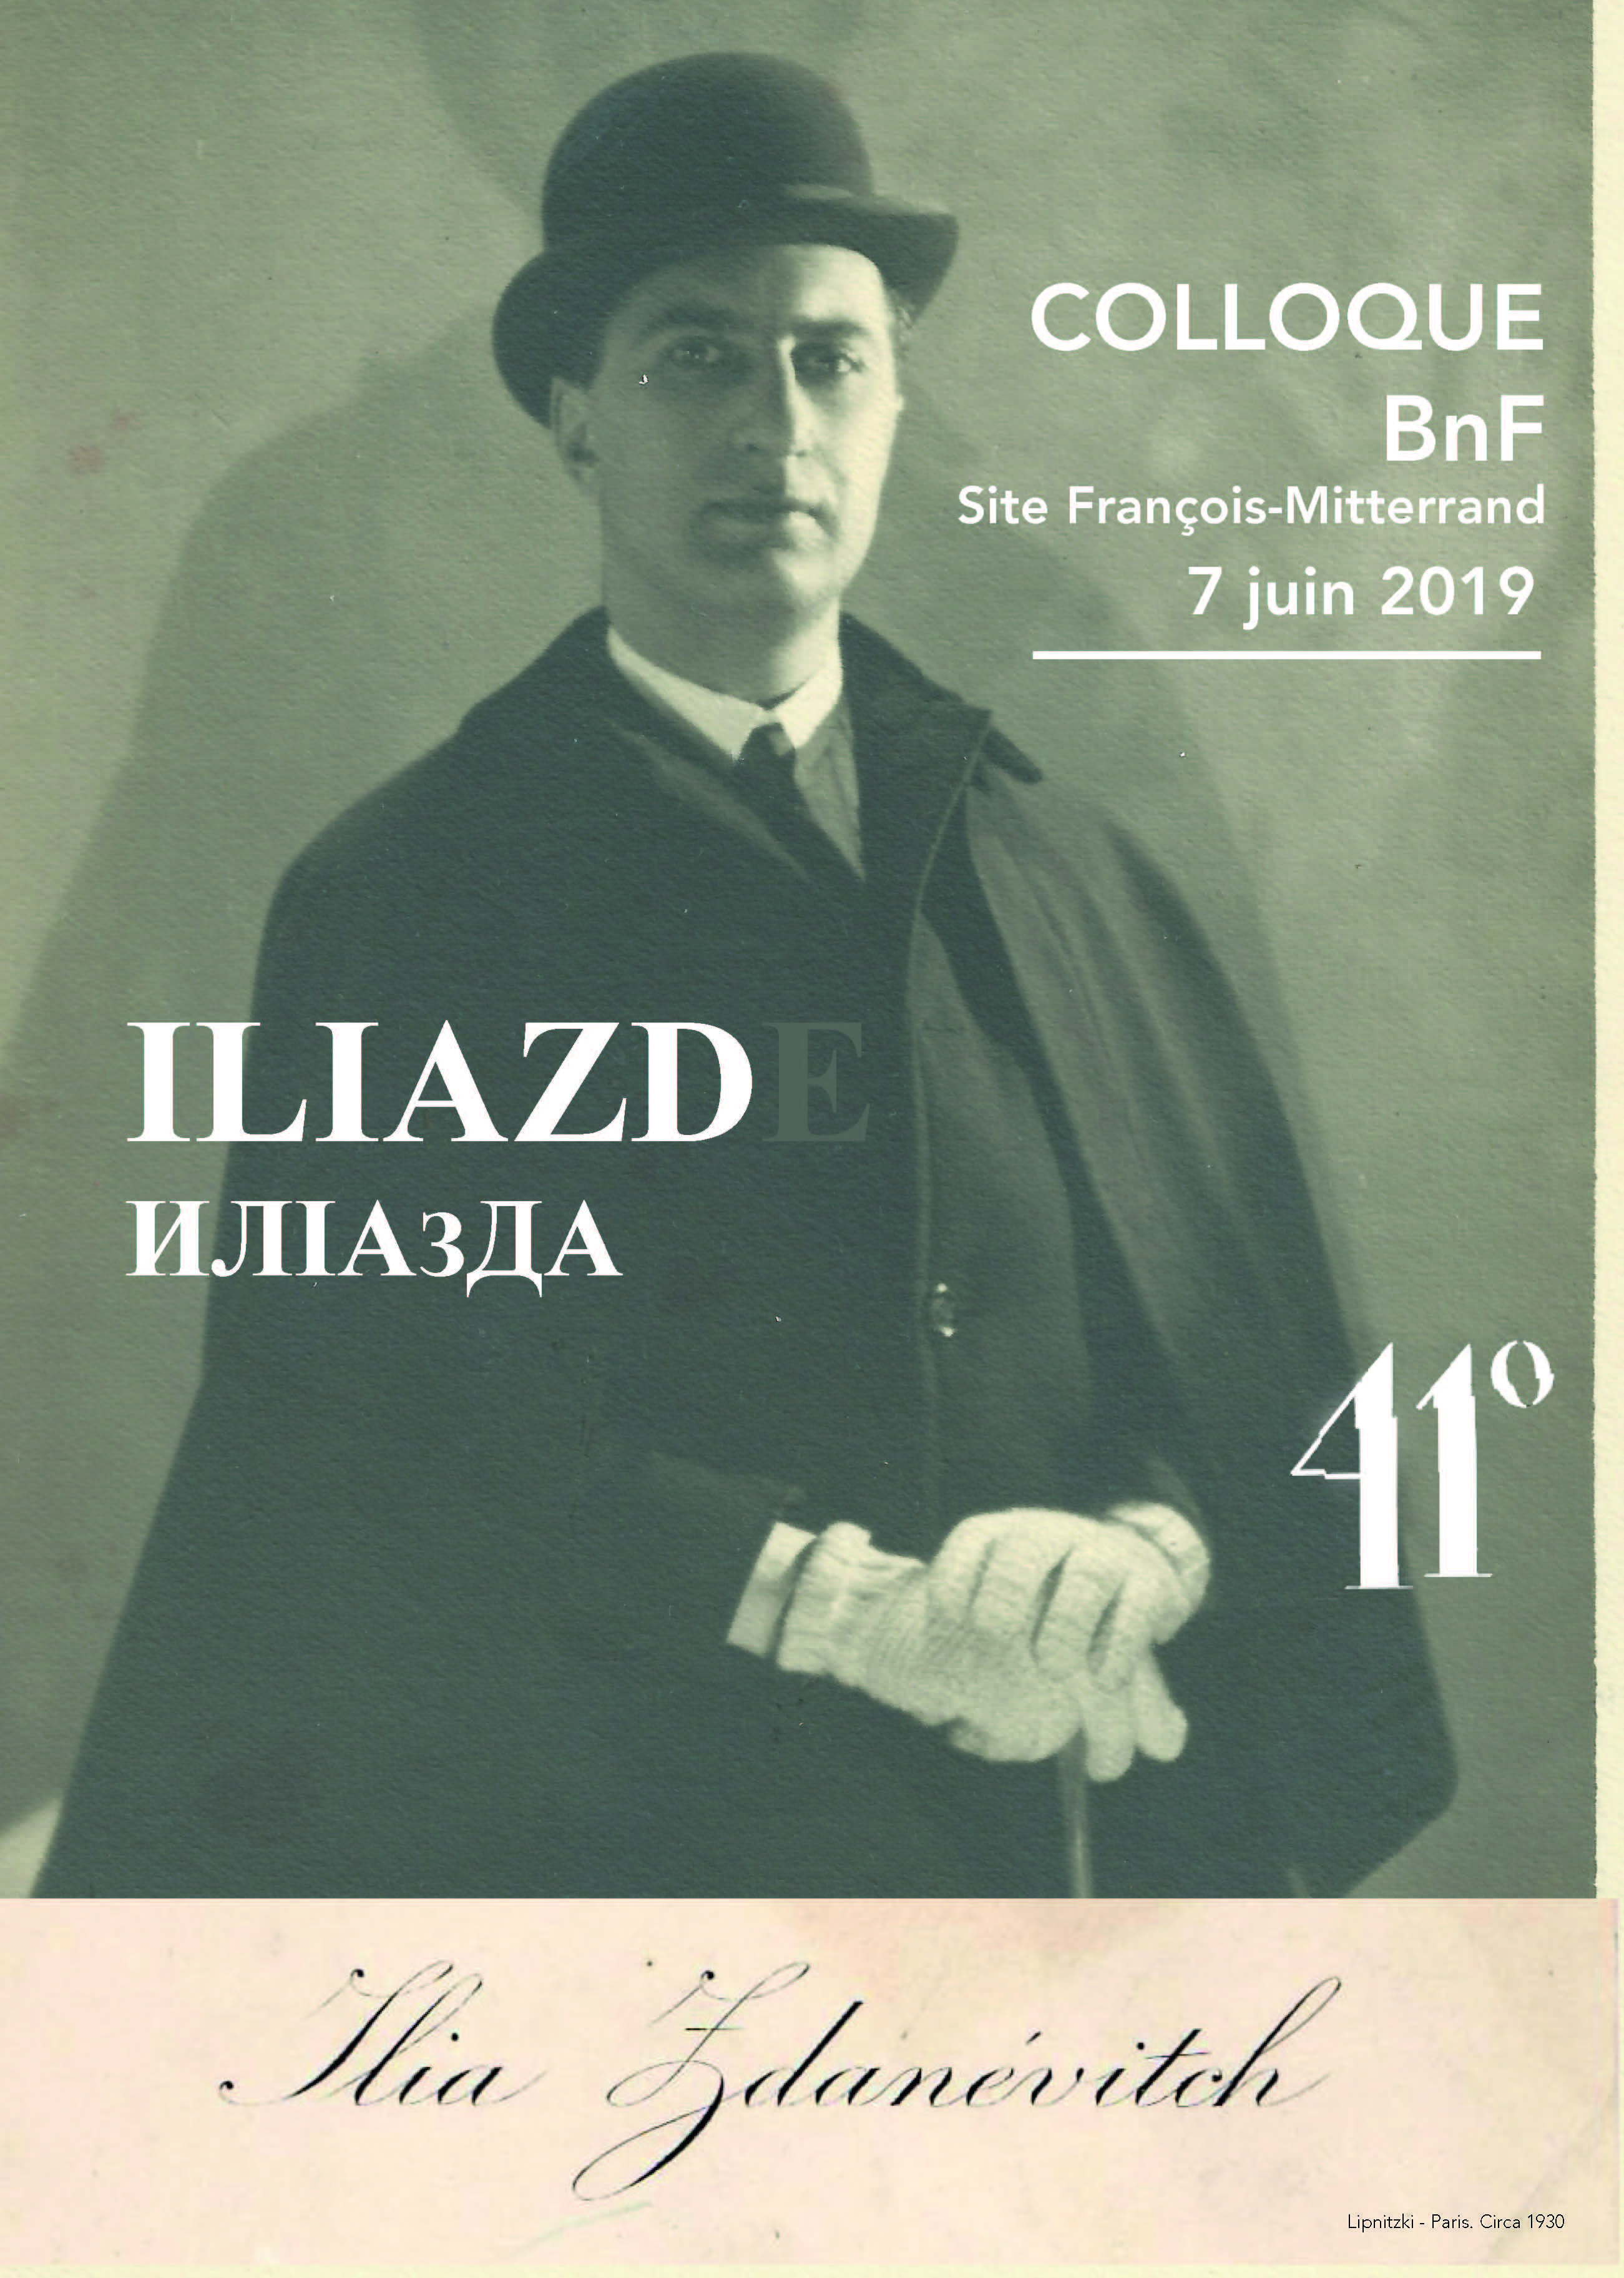 Poster for BnF Iliazd conference June 7, 2019